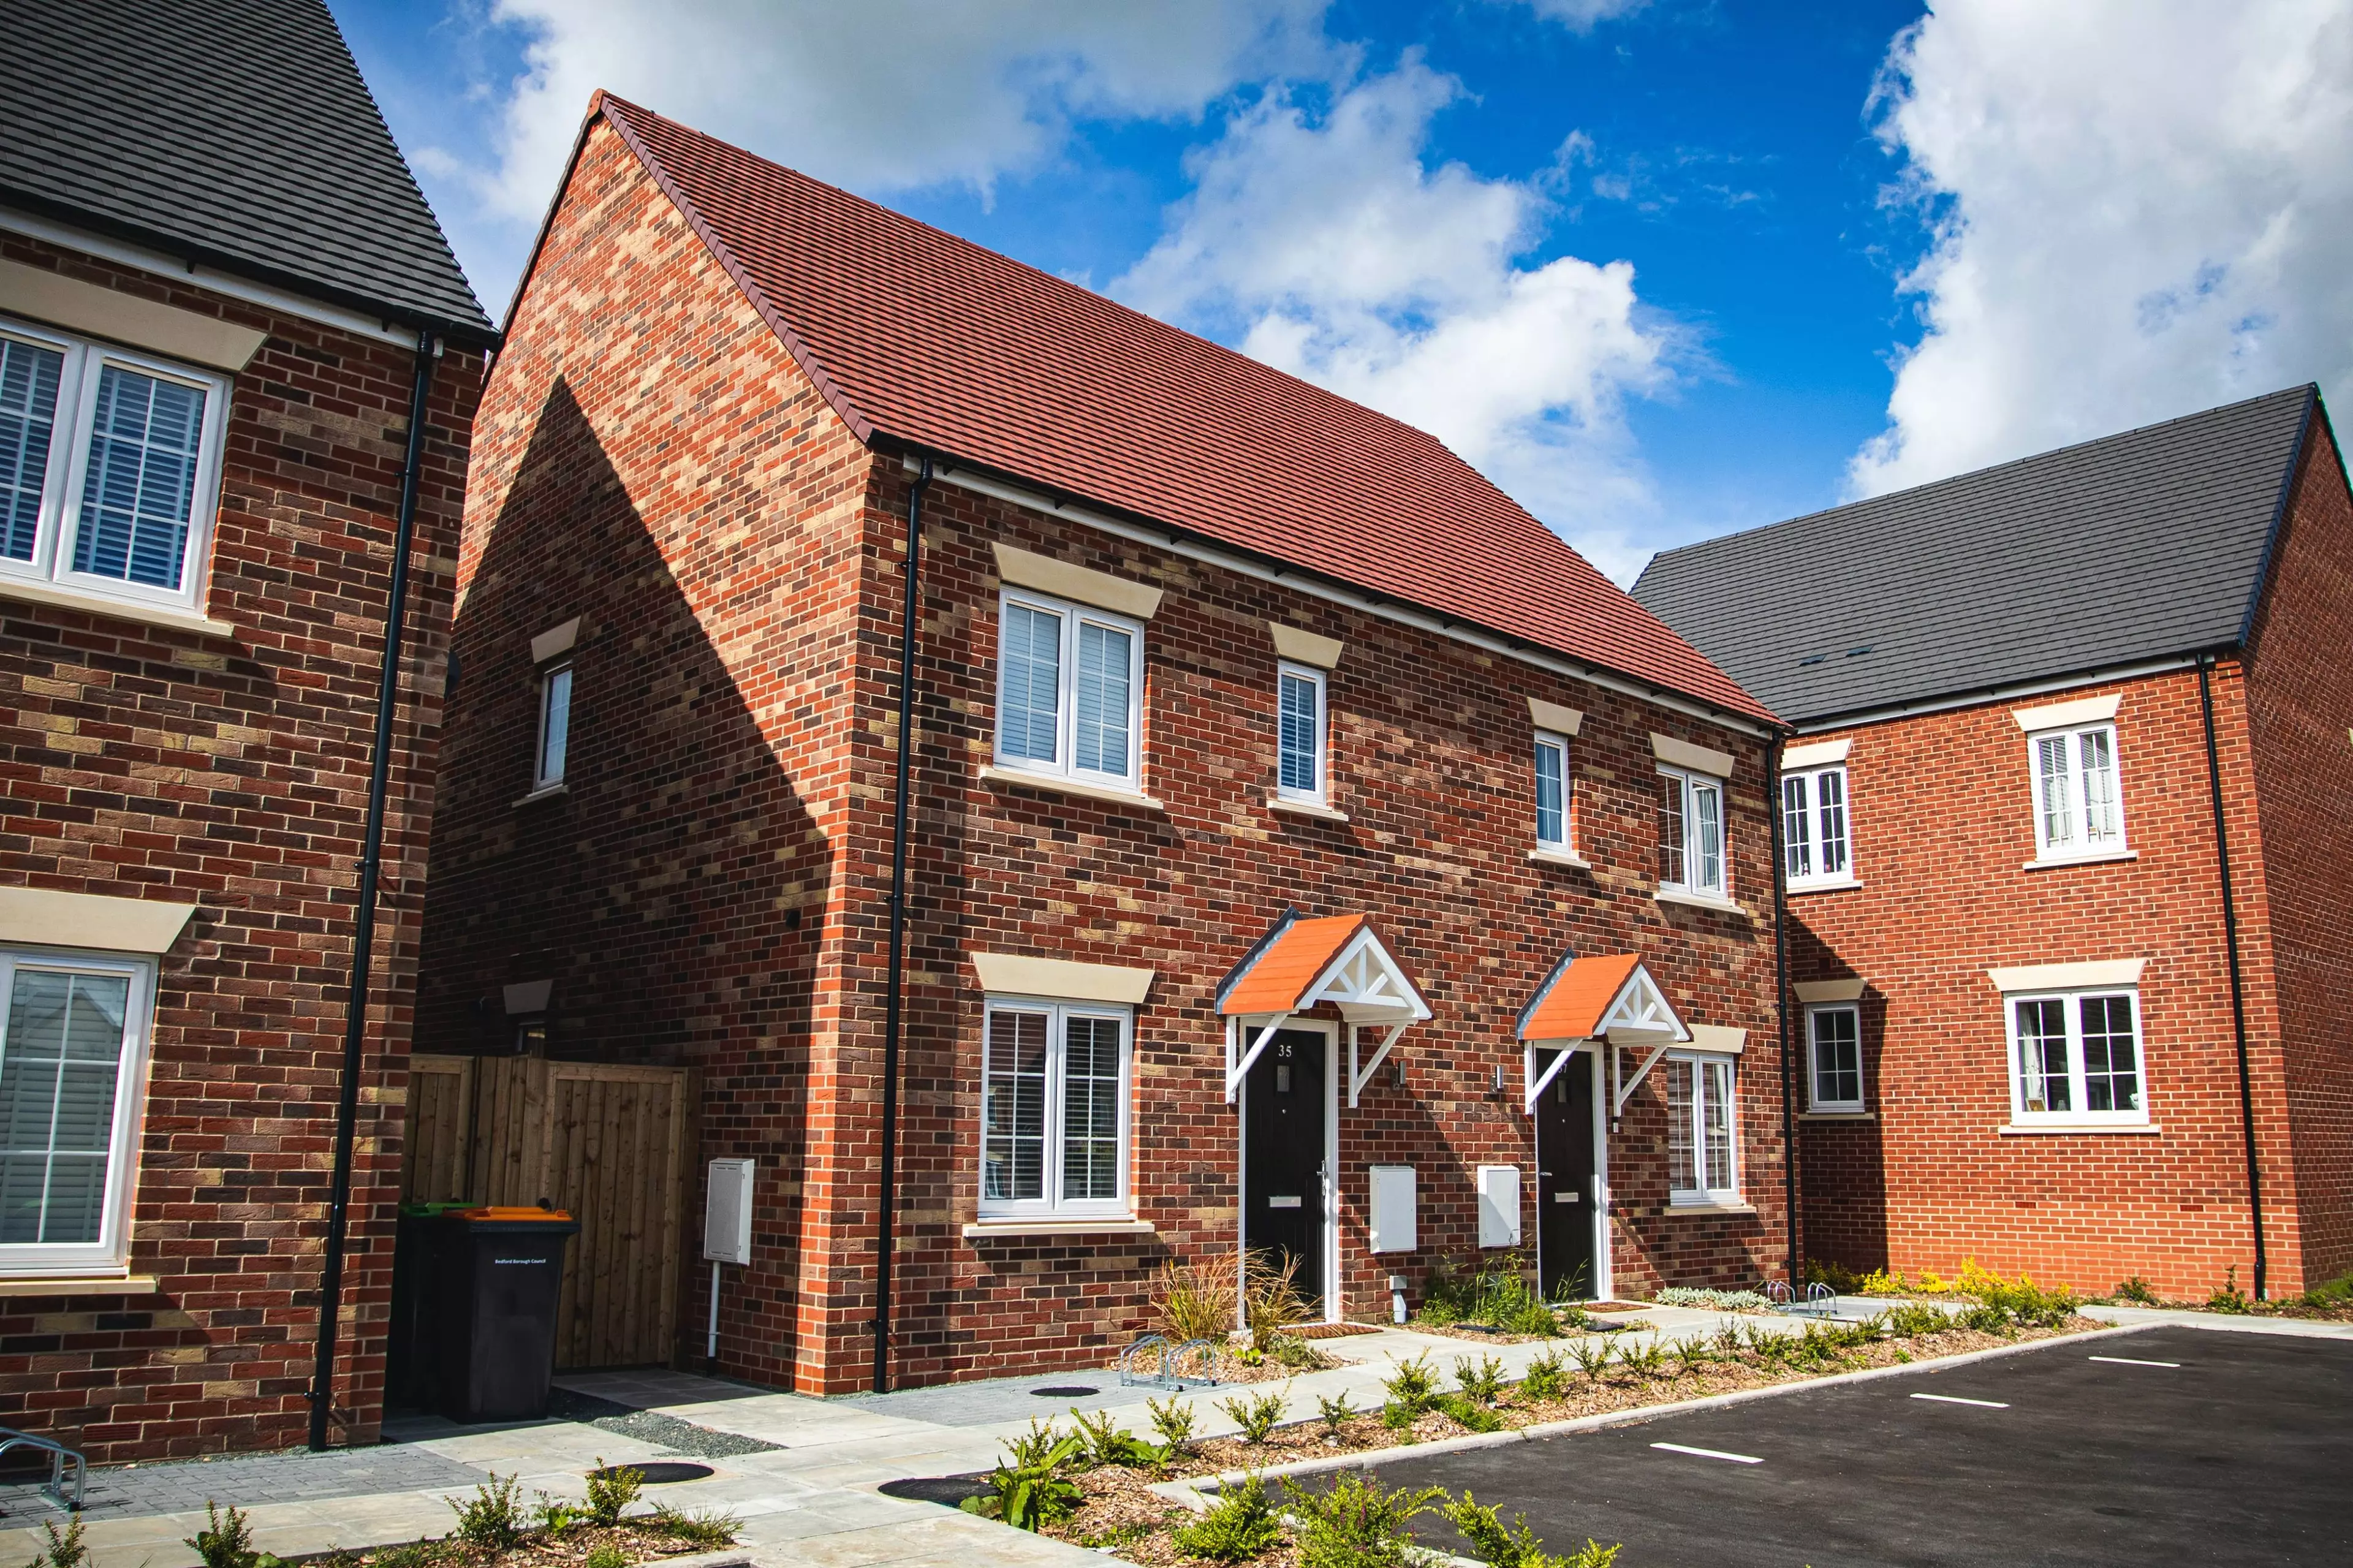 The government will offer at least a 30% off market prices for new builds (